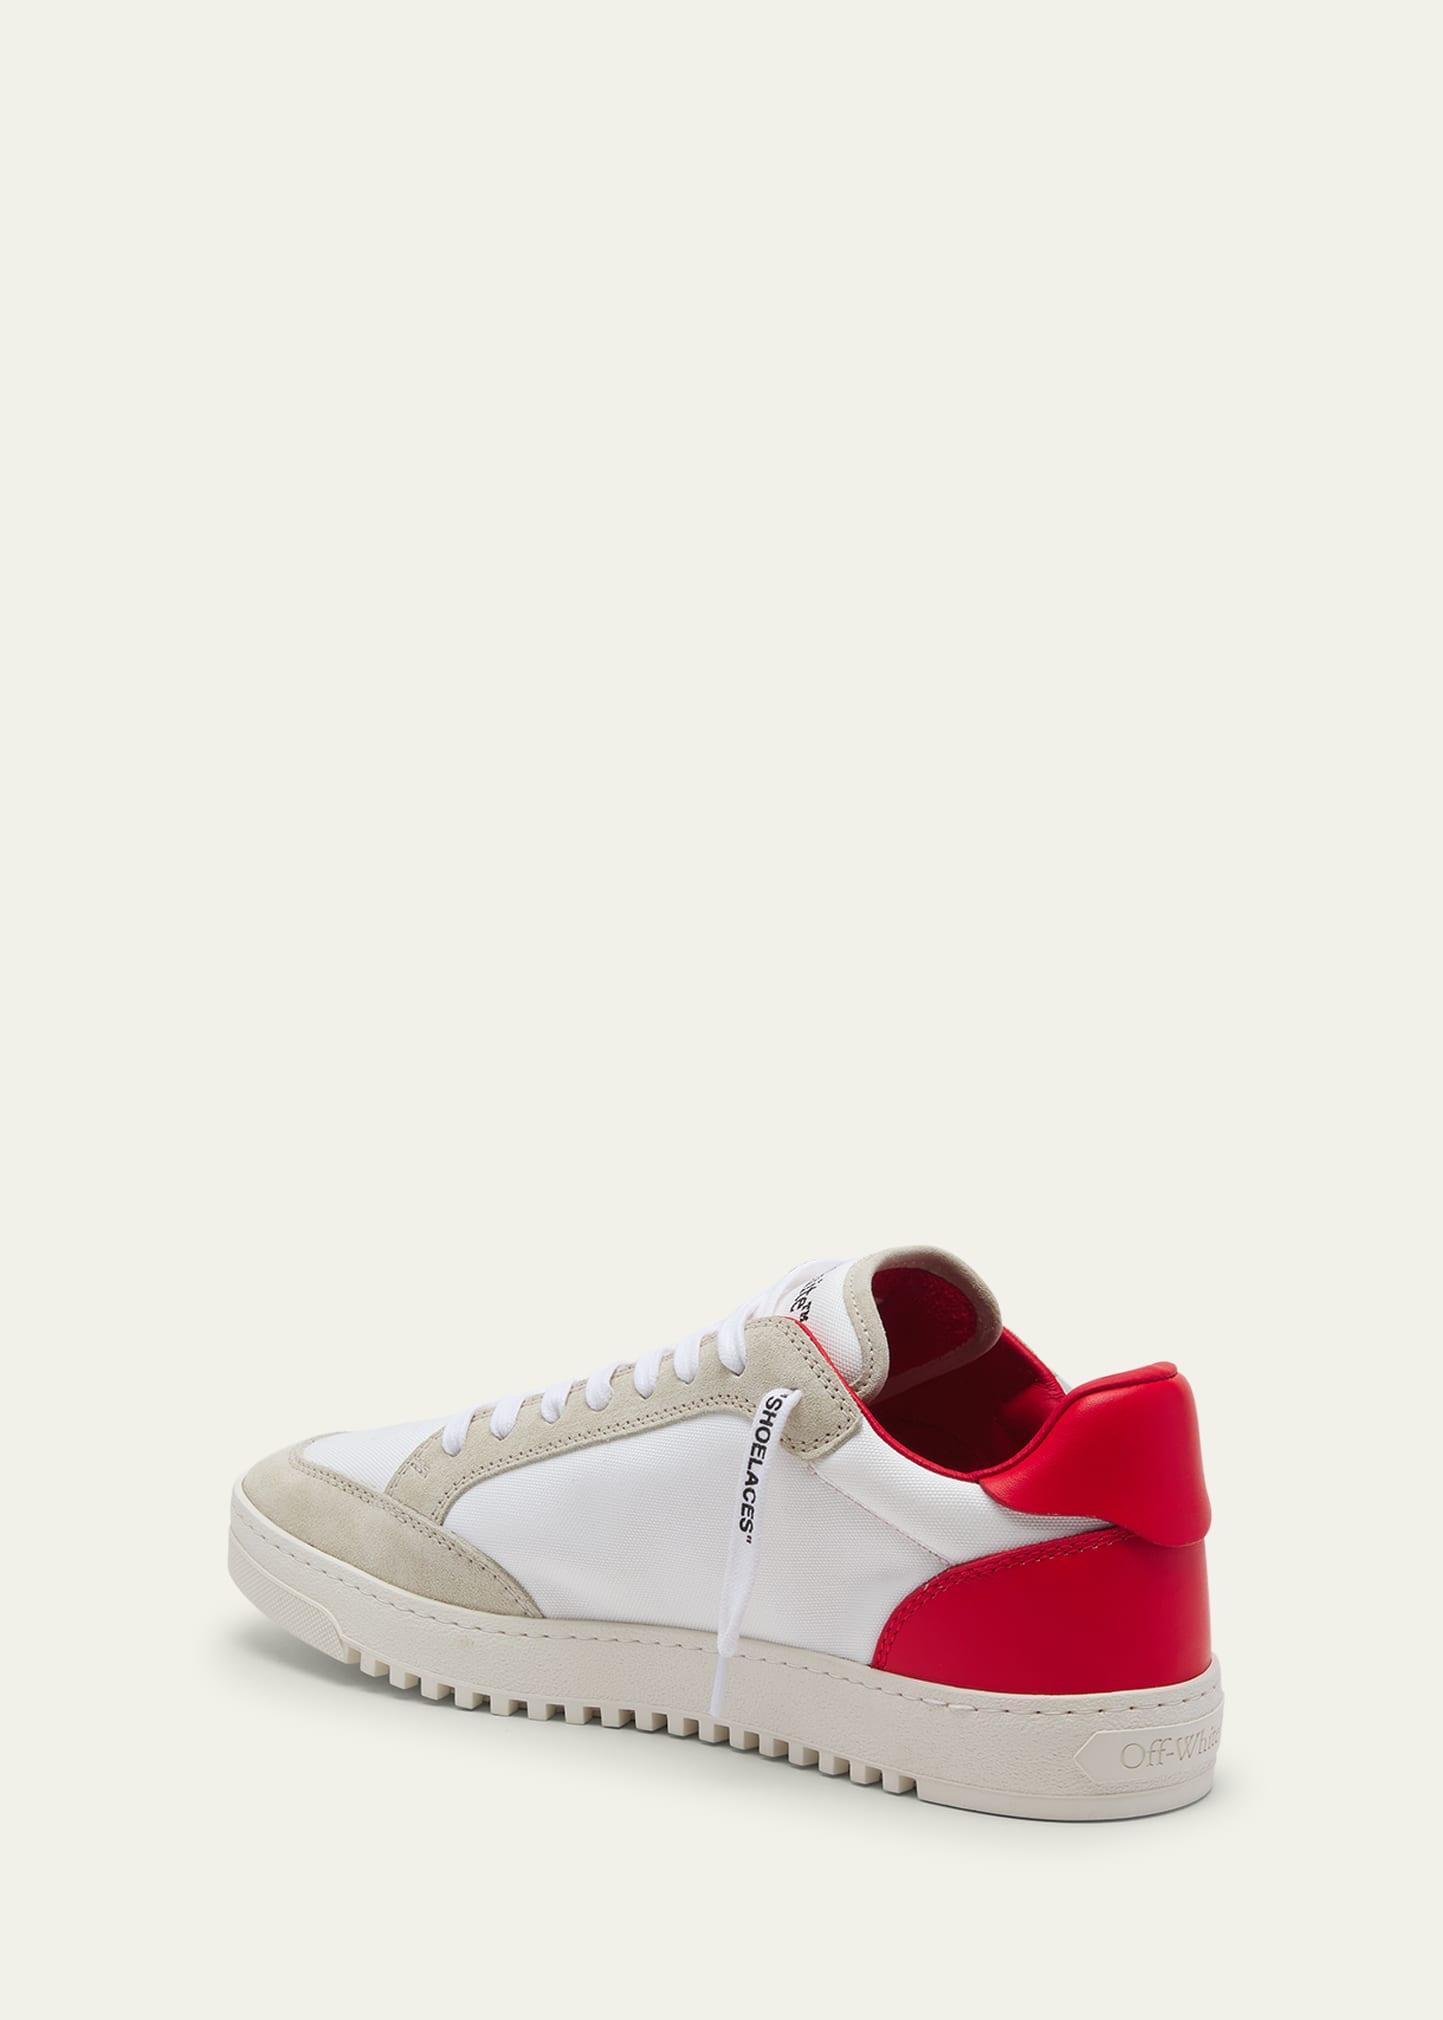 Off-White c/o Virgil Abloh 5.0 Low-top Sneakers in White for Men